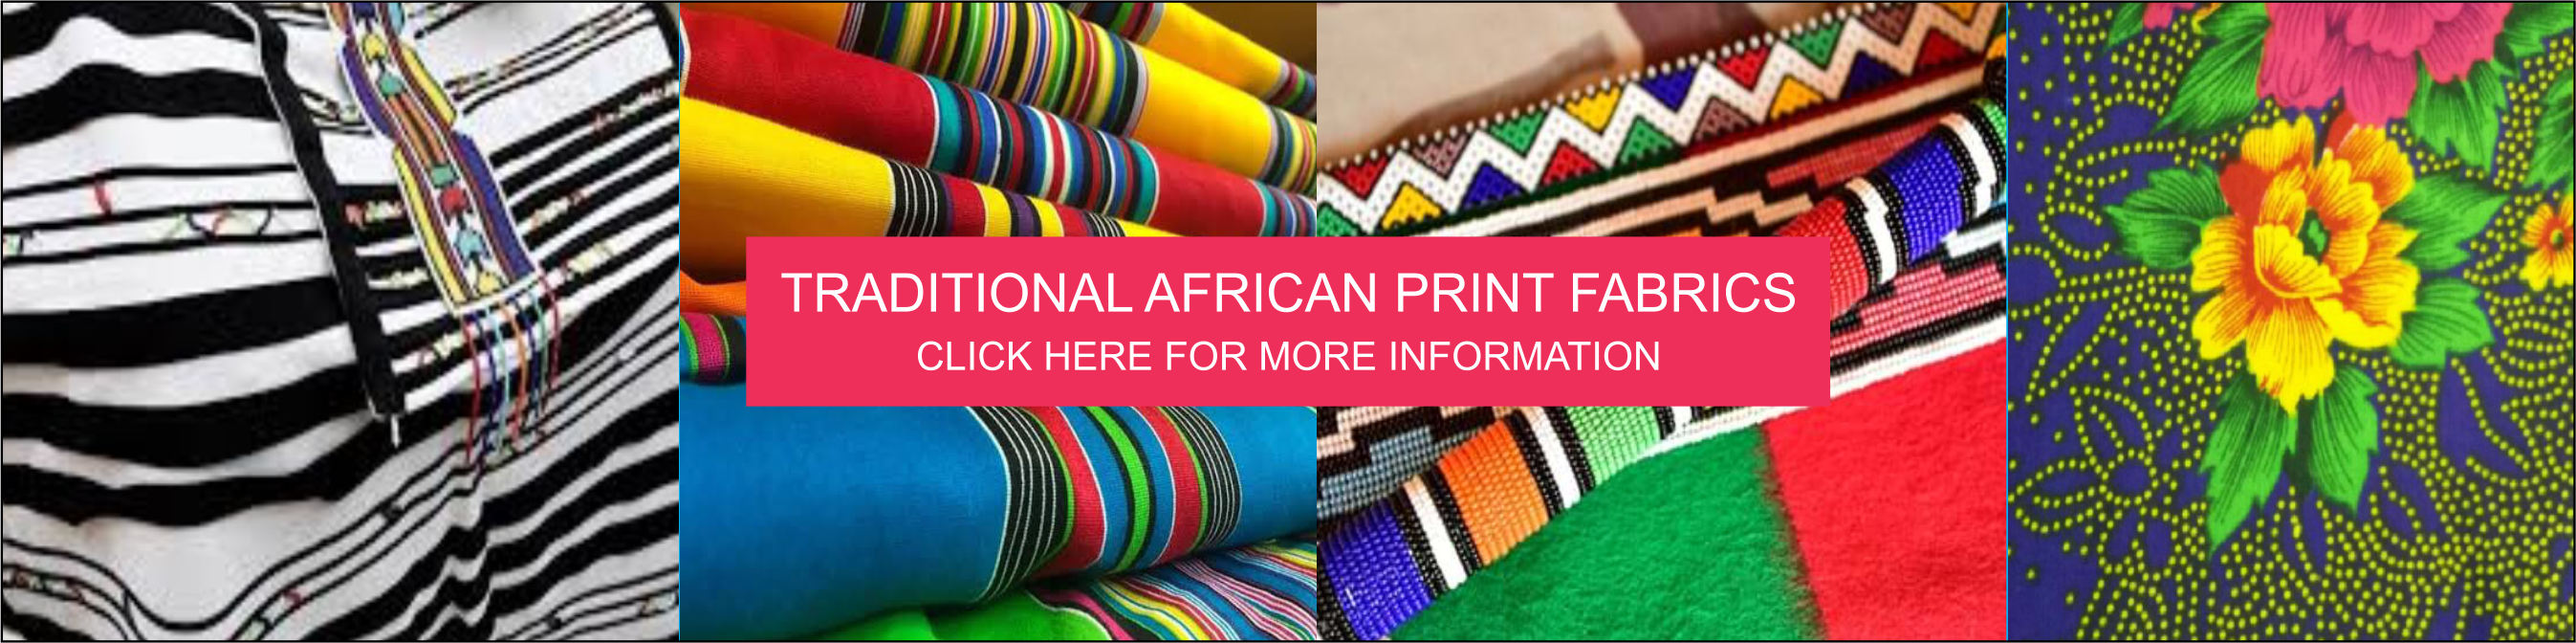 Traditional African Fabric Prints